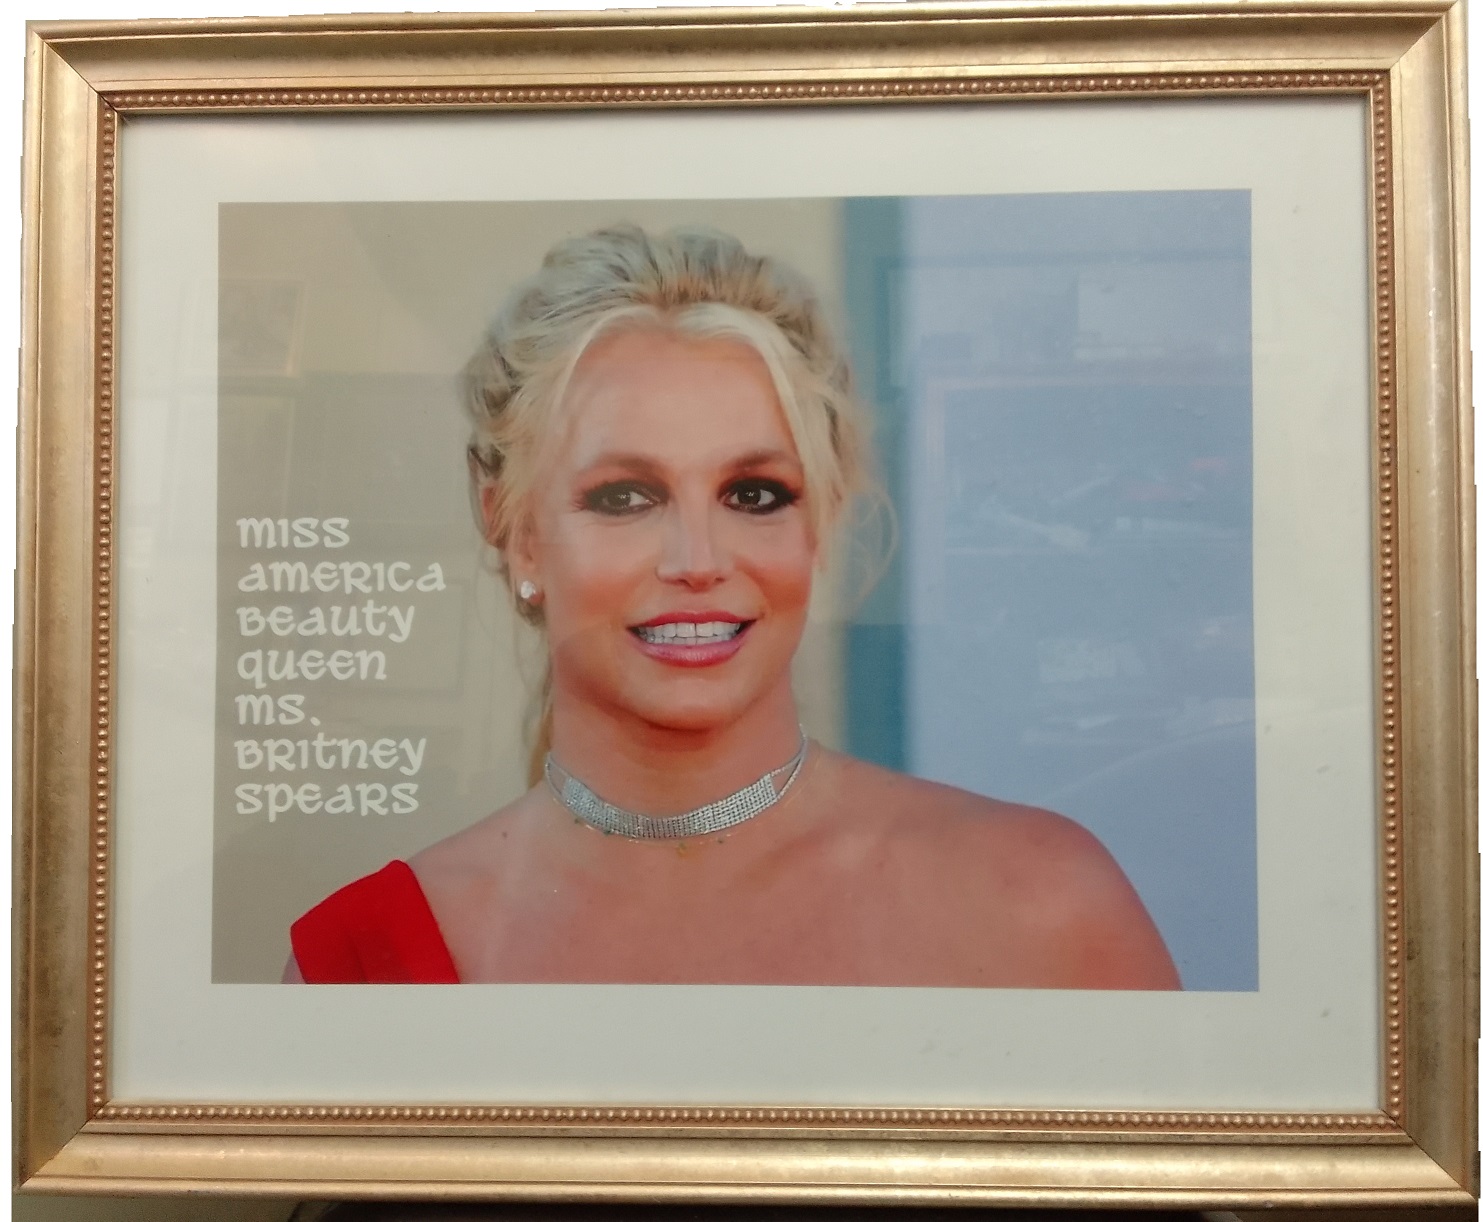 Ms. Britney Spears adorning my livingroom wall - wow!!